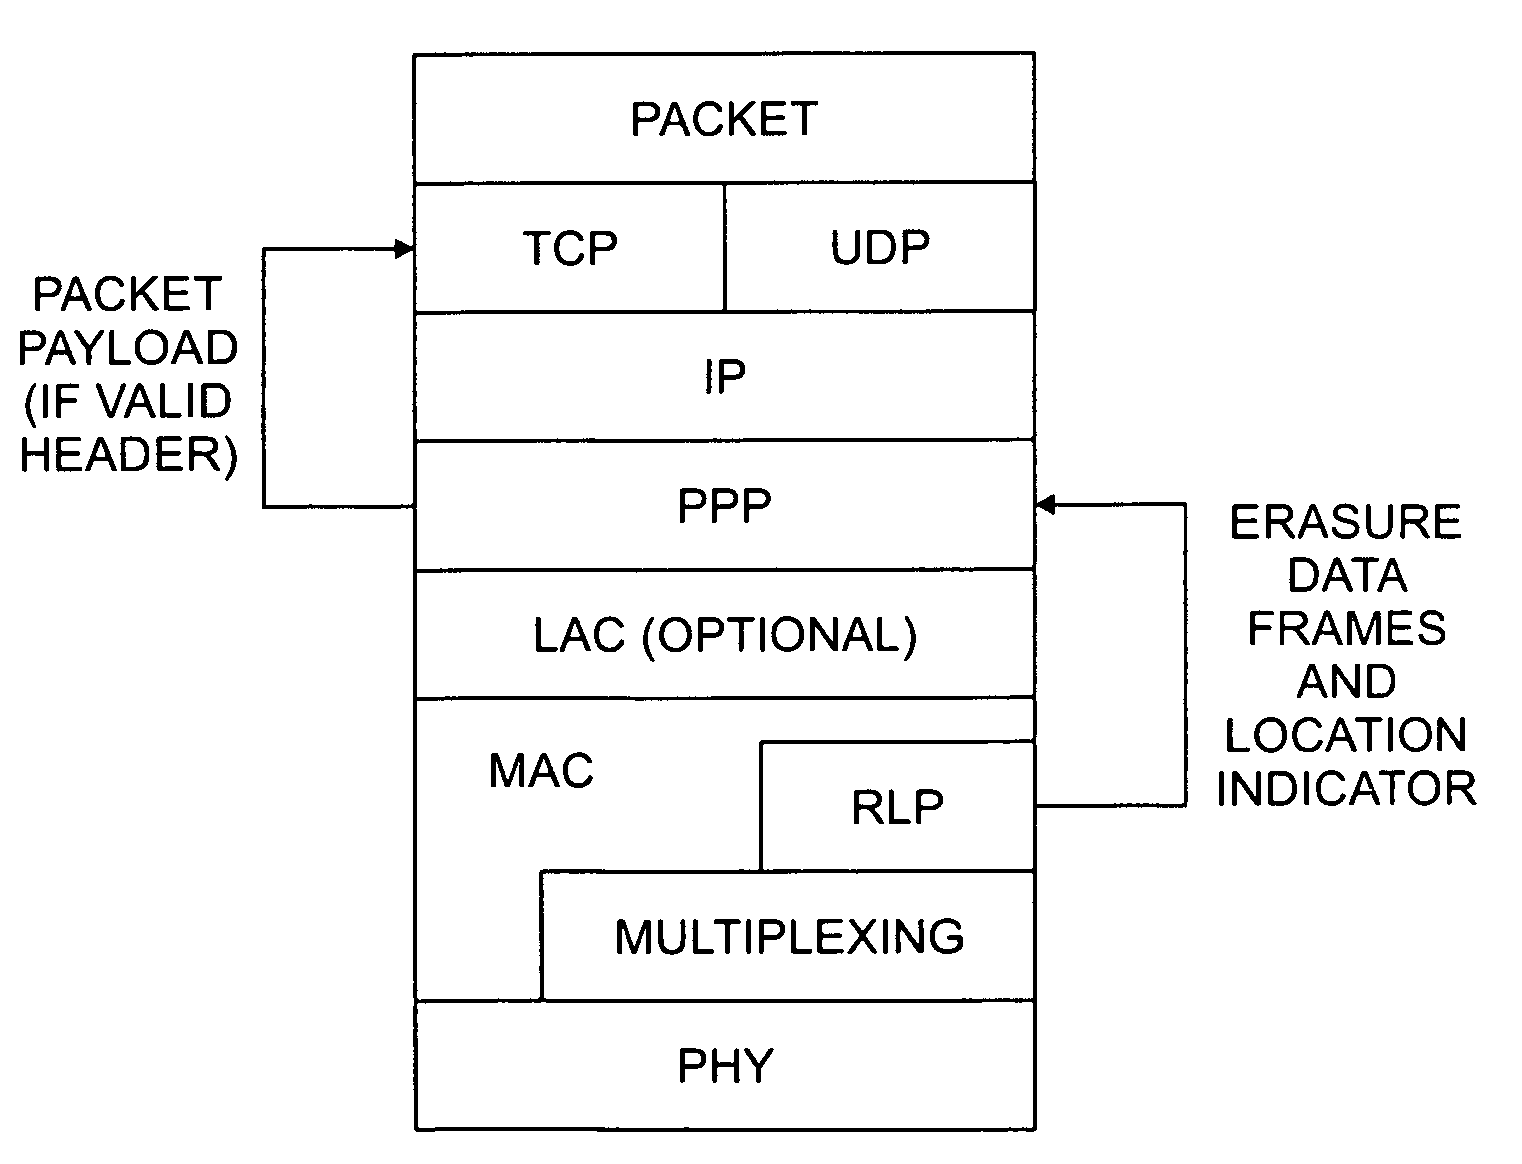 Radio link protocol (RLP)/point-to-point protocol (PPP) design that passes corrupted data and error location information among layers in a wireless data transmission protocol